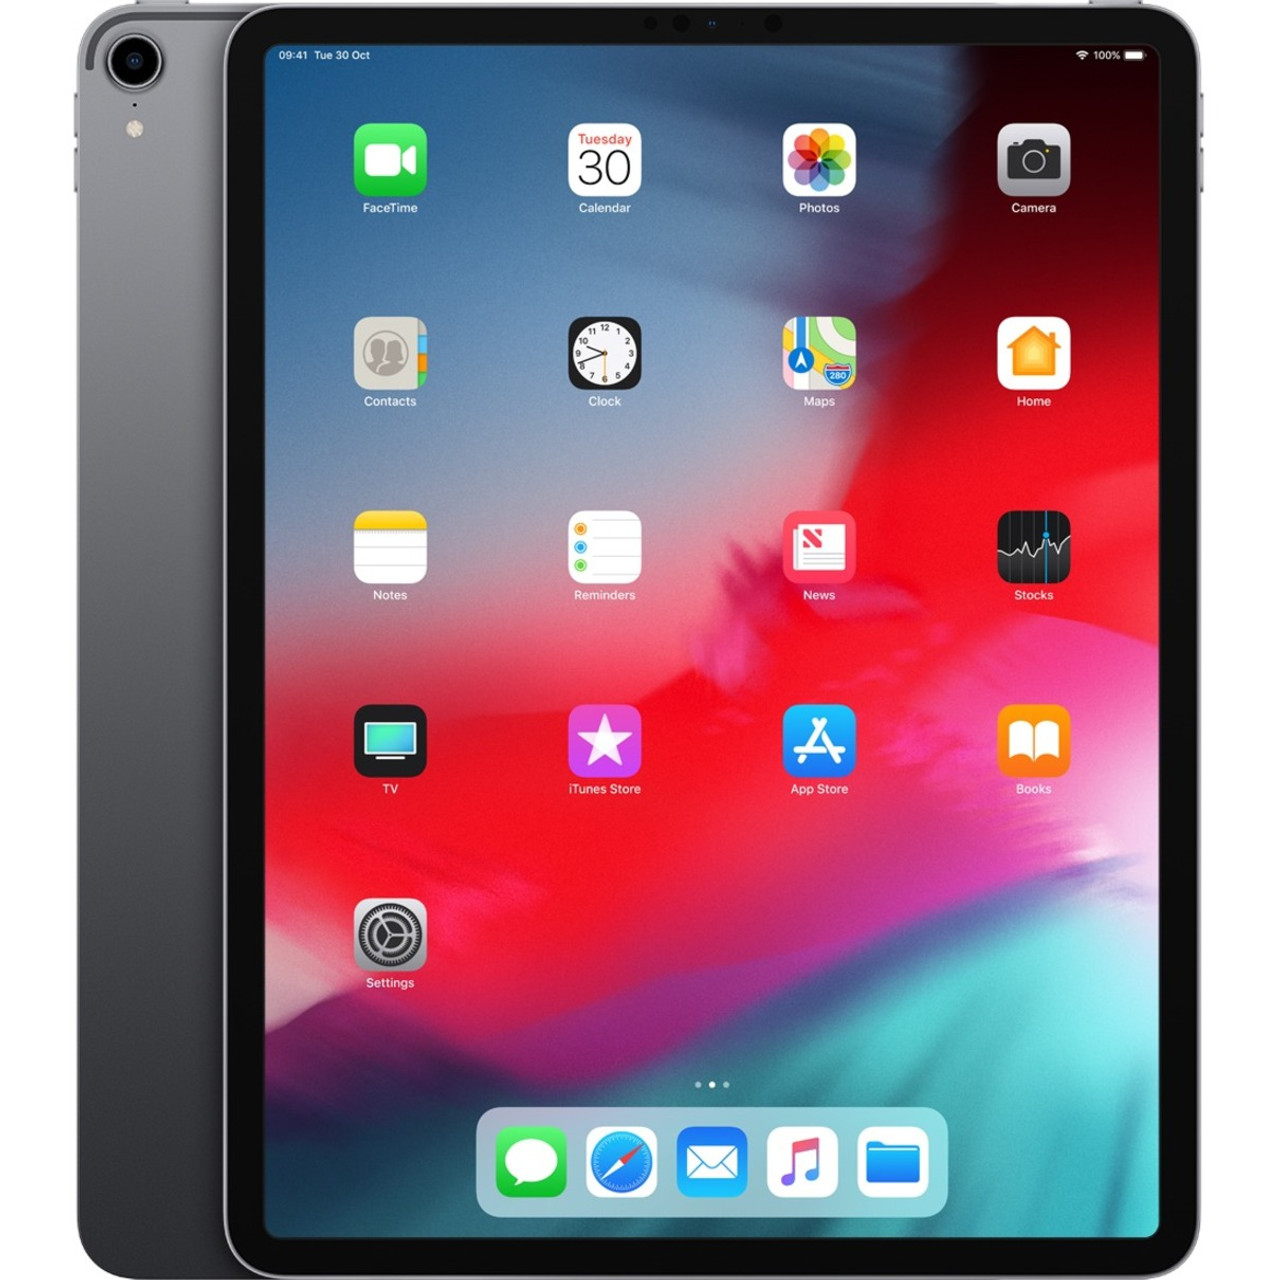 Apple iPad Pro (3rd Generation) Tablet - 12.9" - 64 GB Storage - iOS 12 - 4G - Space Gray - MTHJ2LE/A